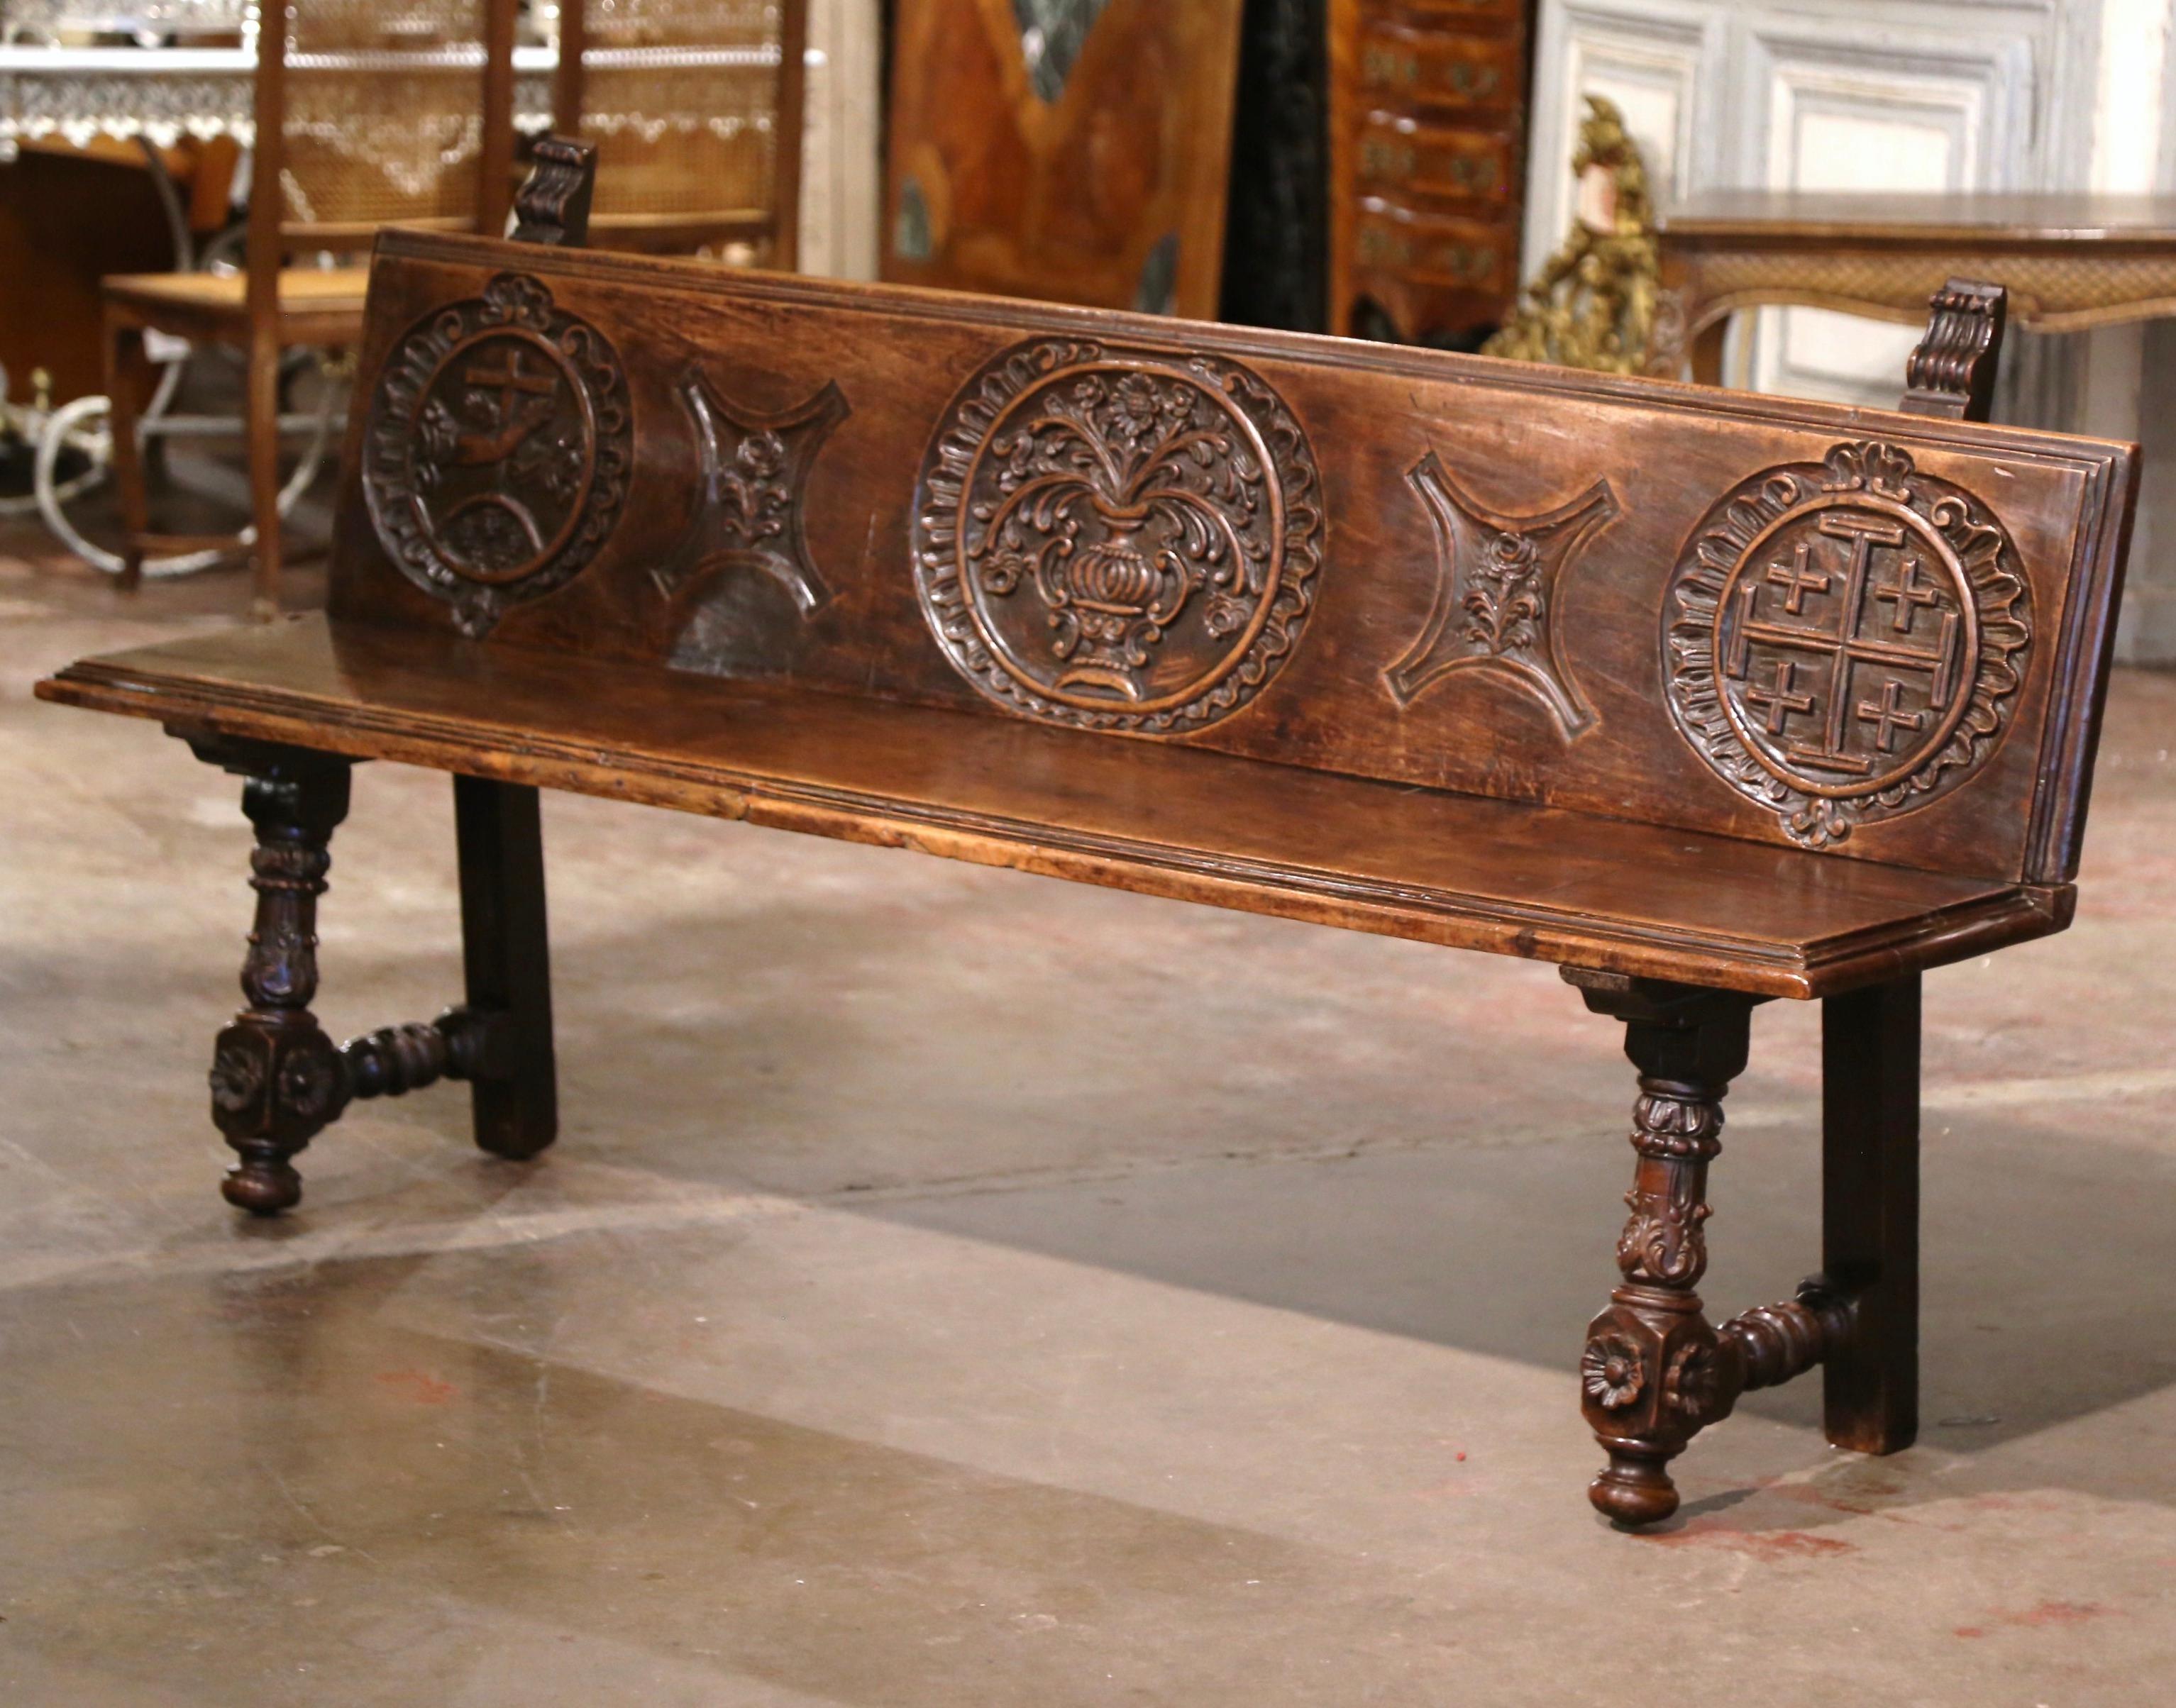 Add extra seating to a hallway, den or living room with this elegant antique bench with back and religious motifs. Crafted in northern Spain circa 1780, this sturdy fruit wood seating stands on carved turned legs decorated with acanthus leaves and